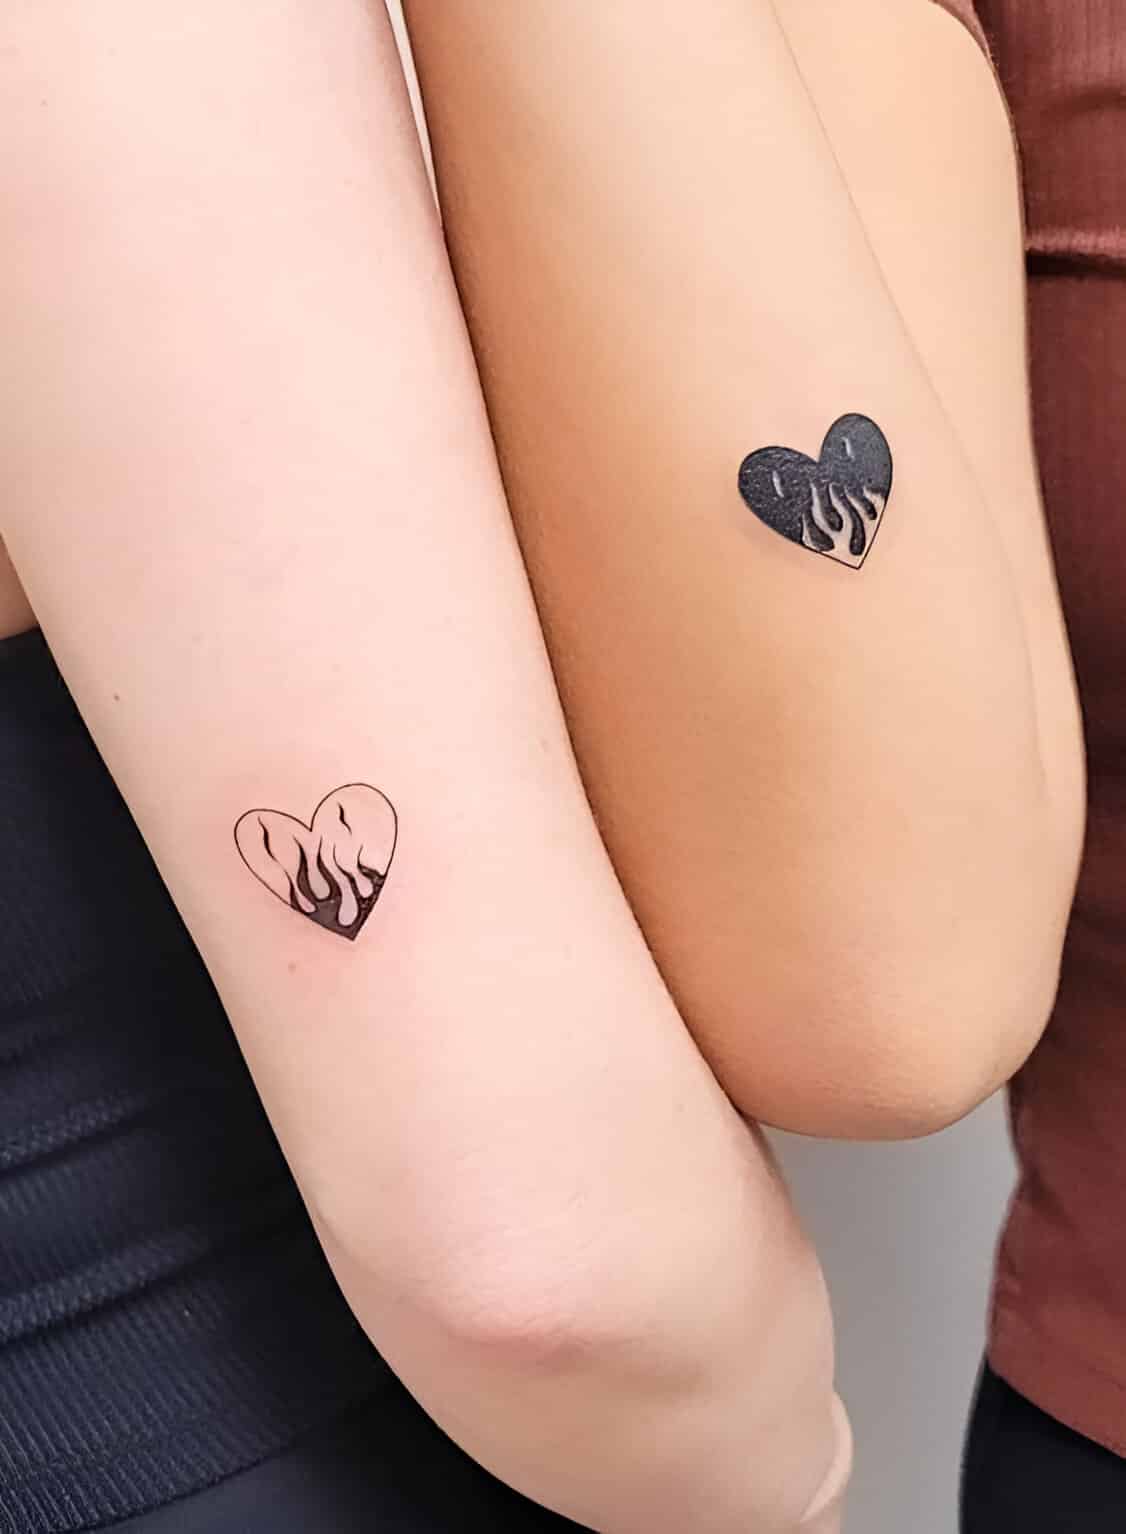 30 Elegant Matching Heart Tattoos To Get With Your Partner ASAP 30